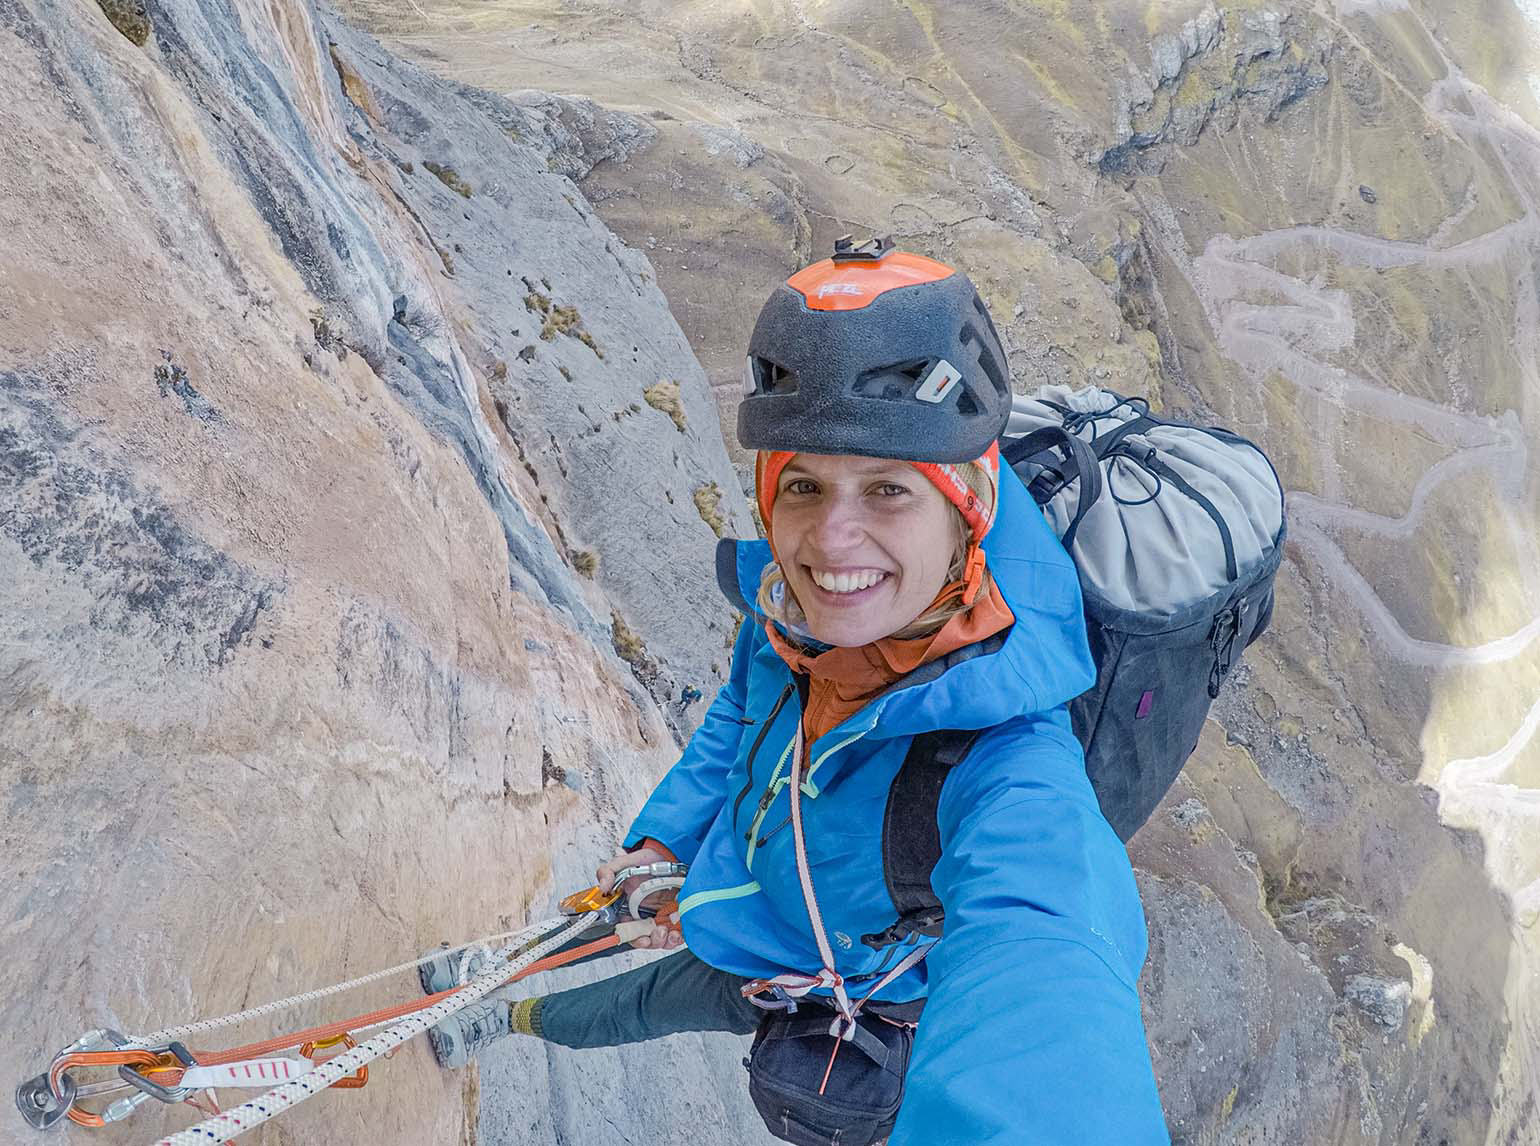 Charlotte taking a selfie while at the top of a climbing route in Peru